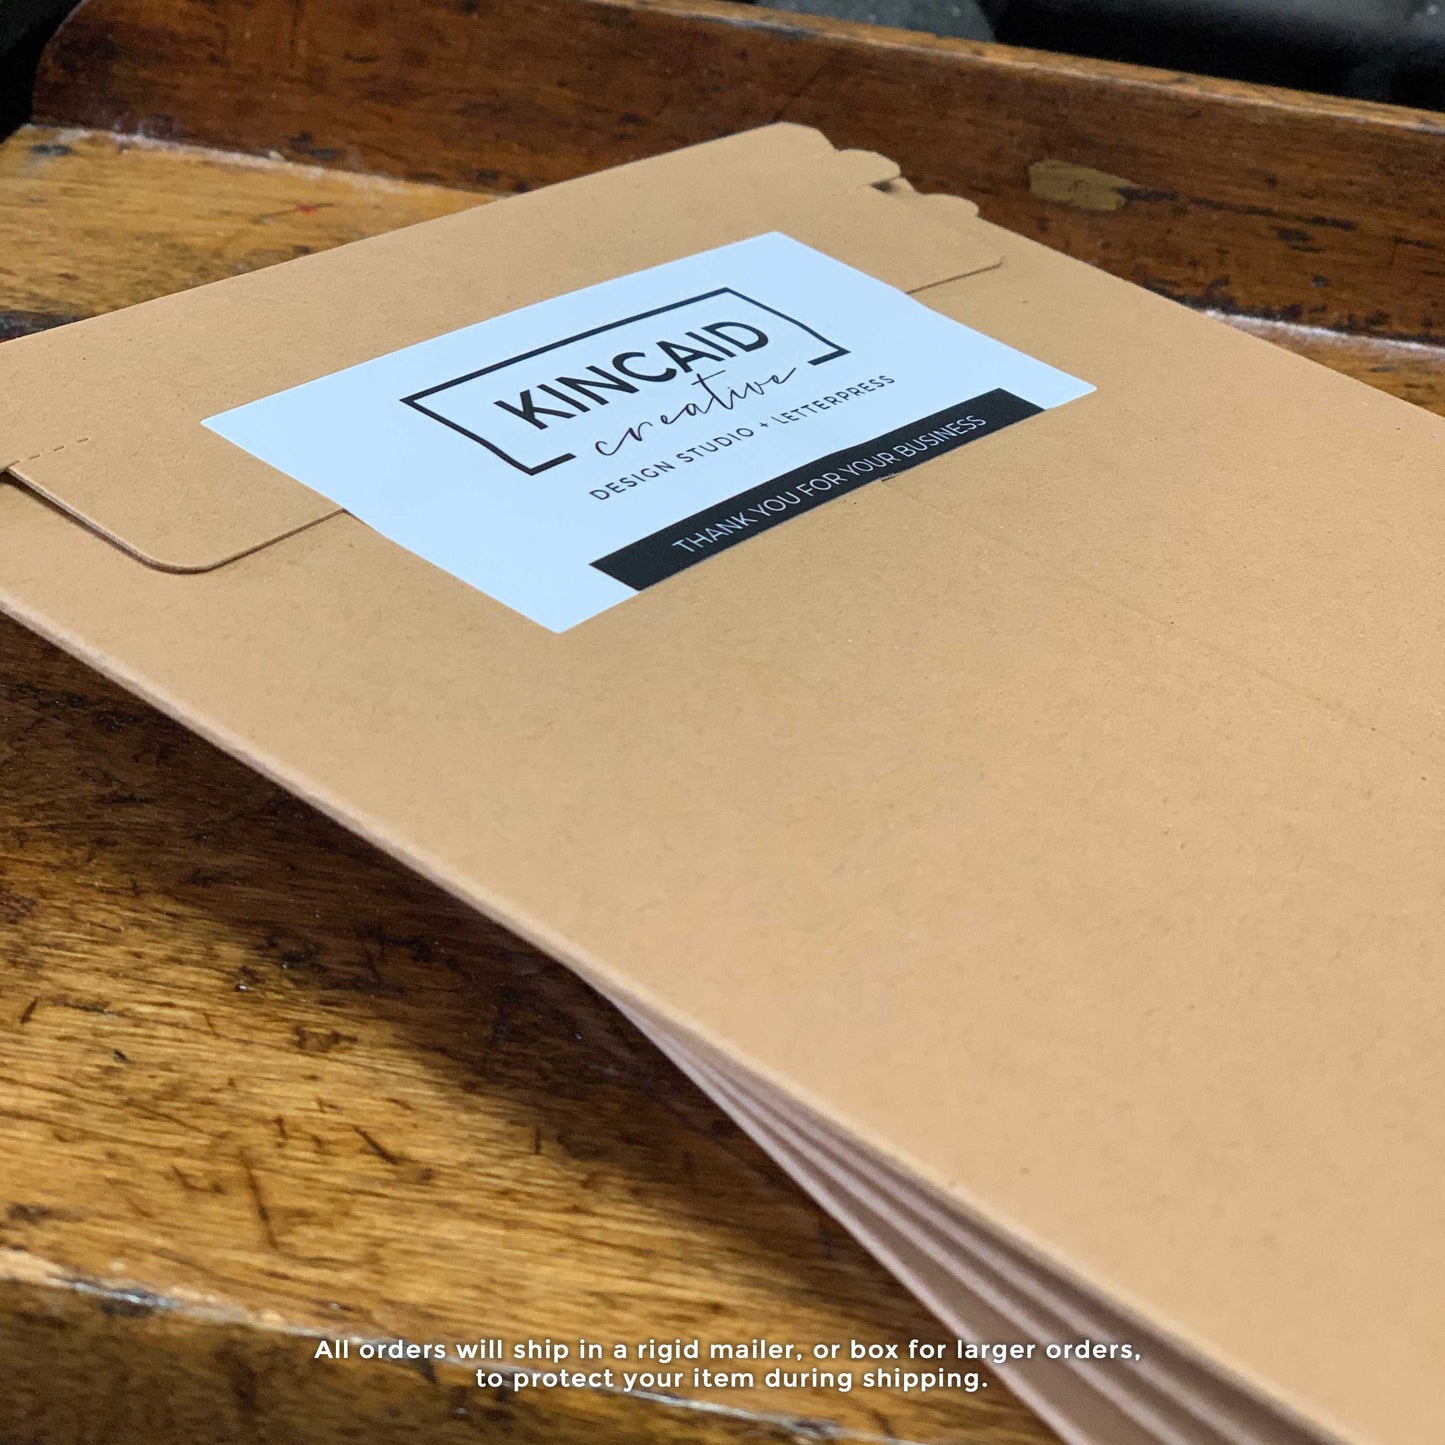 Rigid shipping envelope to protect your greeting card order in the mail, Kincaid Creative brand labels